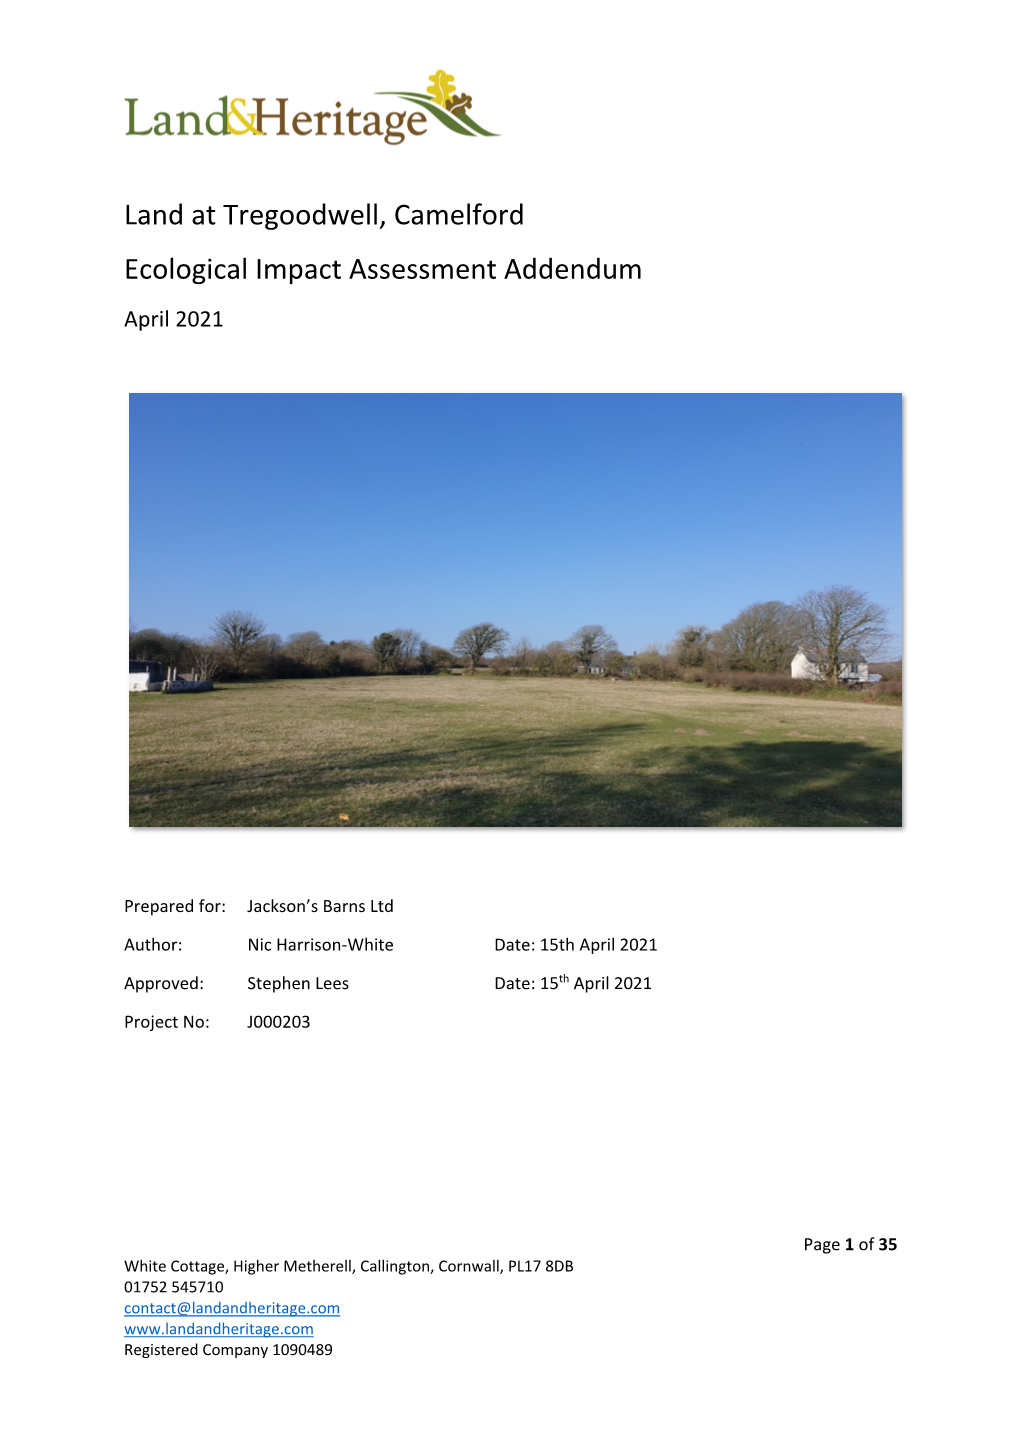 Land at Tregoodwell, Camelford Ecological Impact Assessment Addendum April 2021